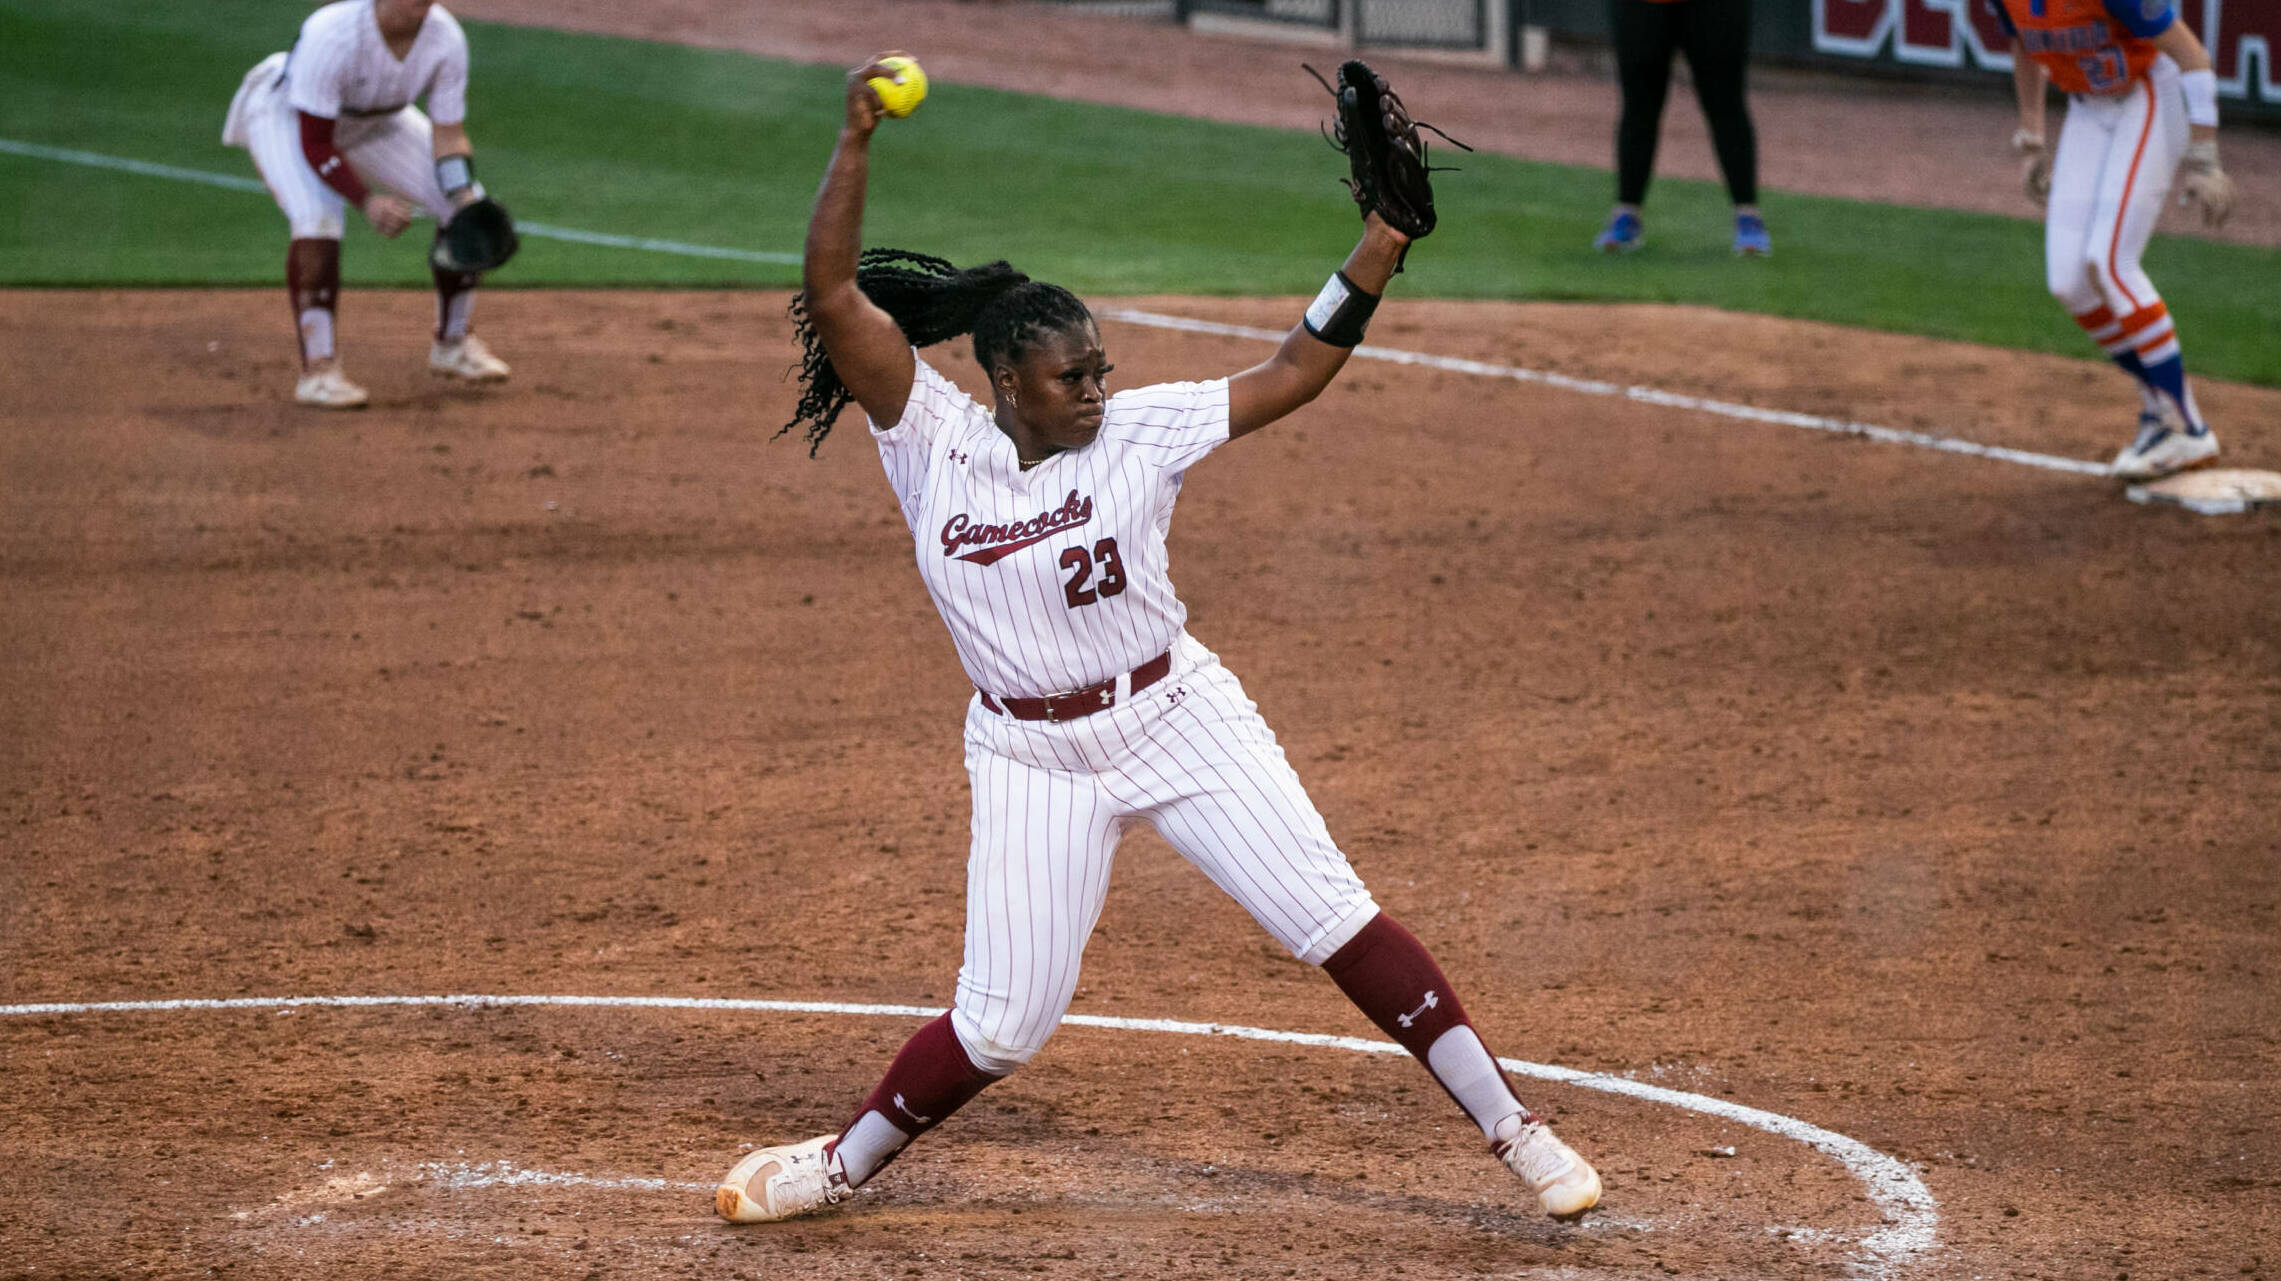 Gobourne Throws One Hitter, Gamecocks Win Series Over No. 11 Florida